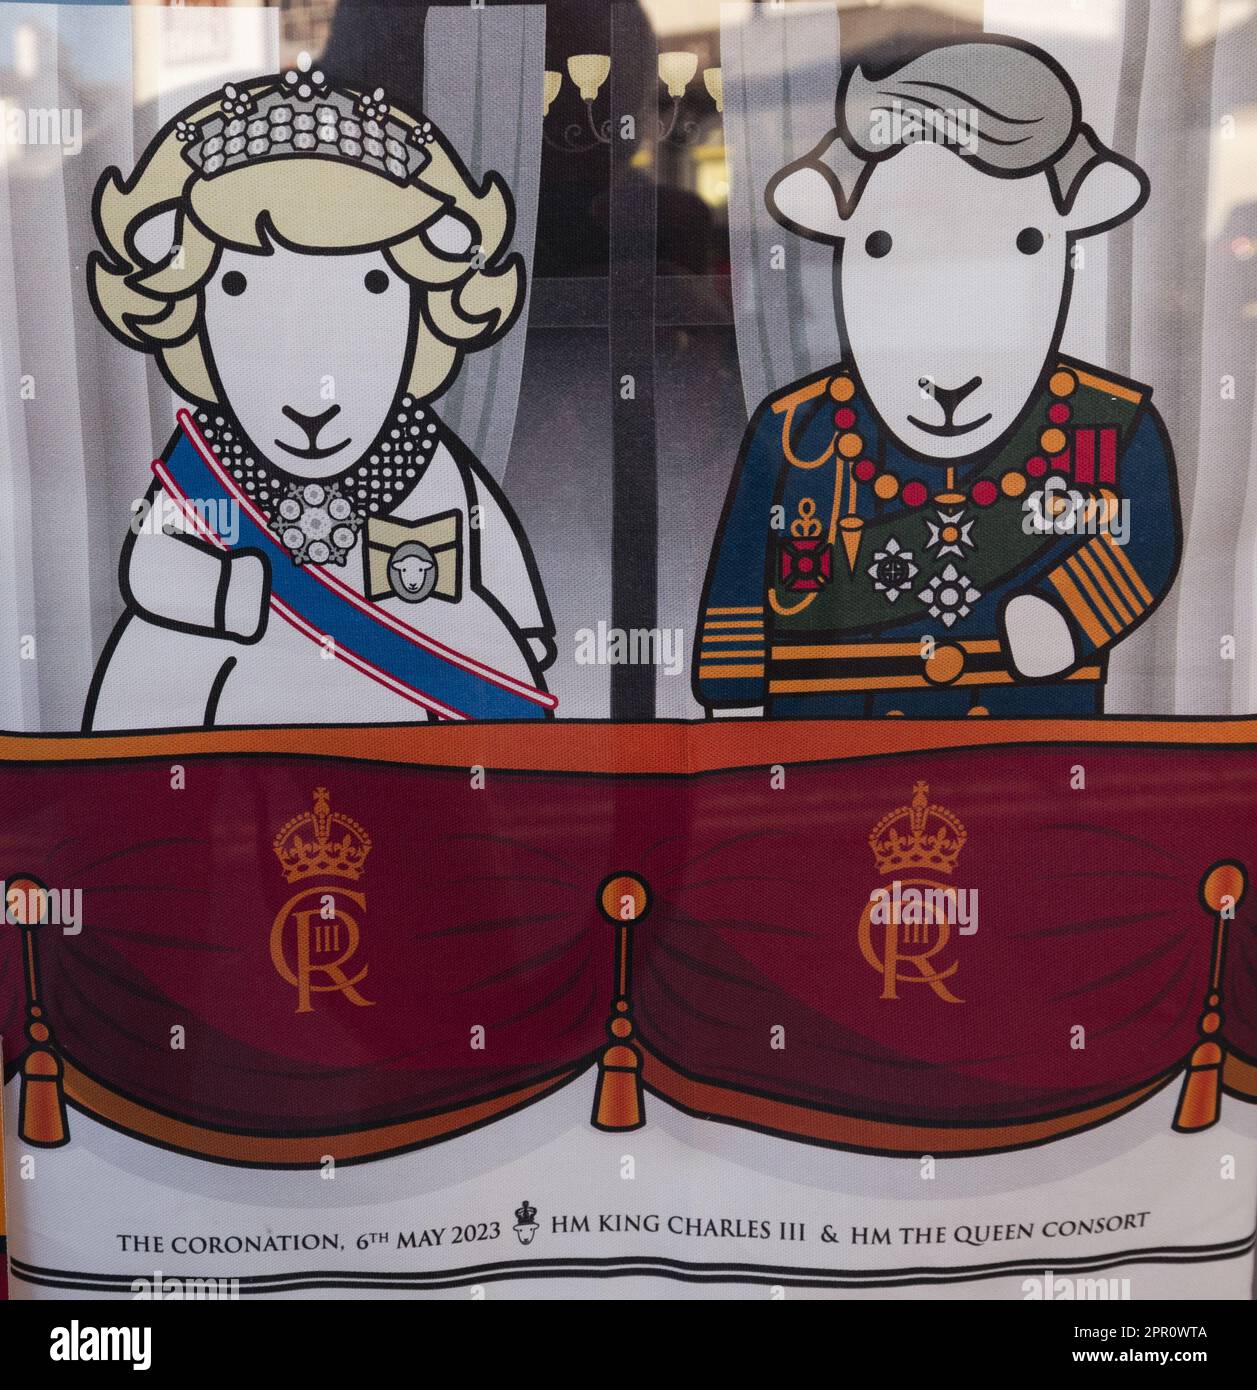 Bowness on Windermere Village Cumbria, UK. 25th Apr, 2023. humorous .window display for the Coronation HM King Charles III & HM The Queen Consort depicted as Herdwick Sheep (Herdwick sheep are the native breed of The Lake District ) Cumbria UK Credit: Gordon Shoosmith/Alamy Live News Stock Photo